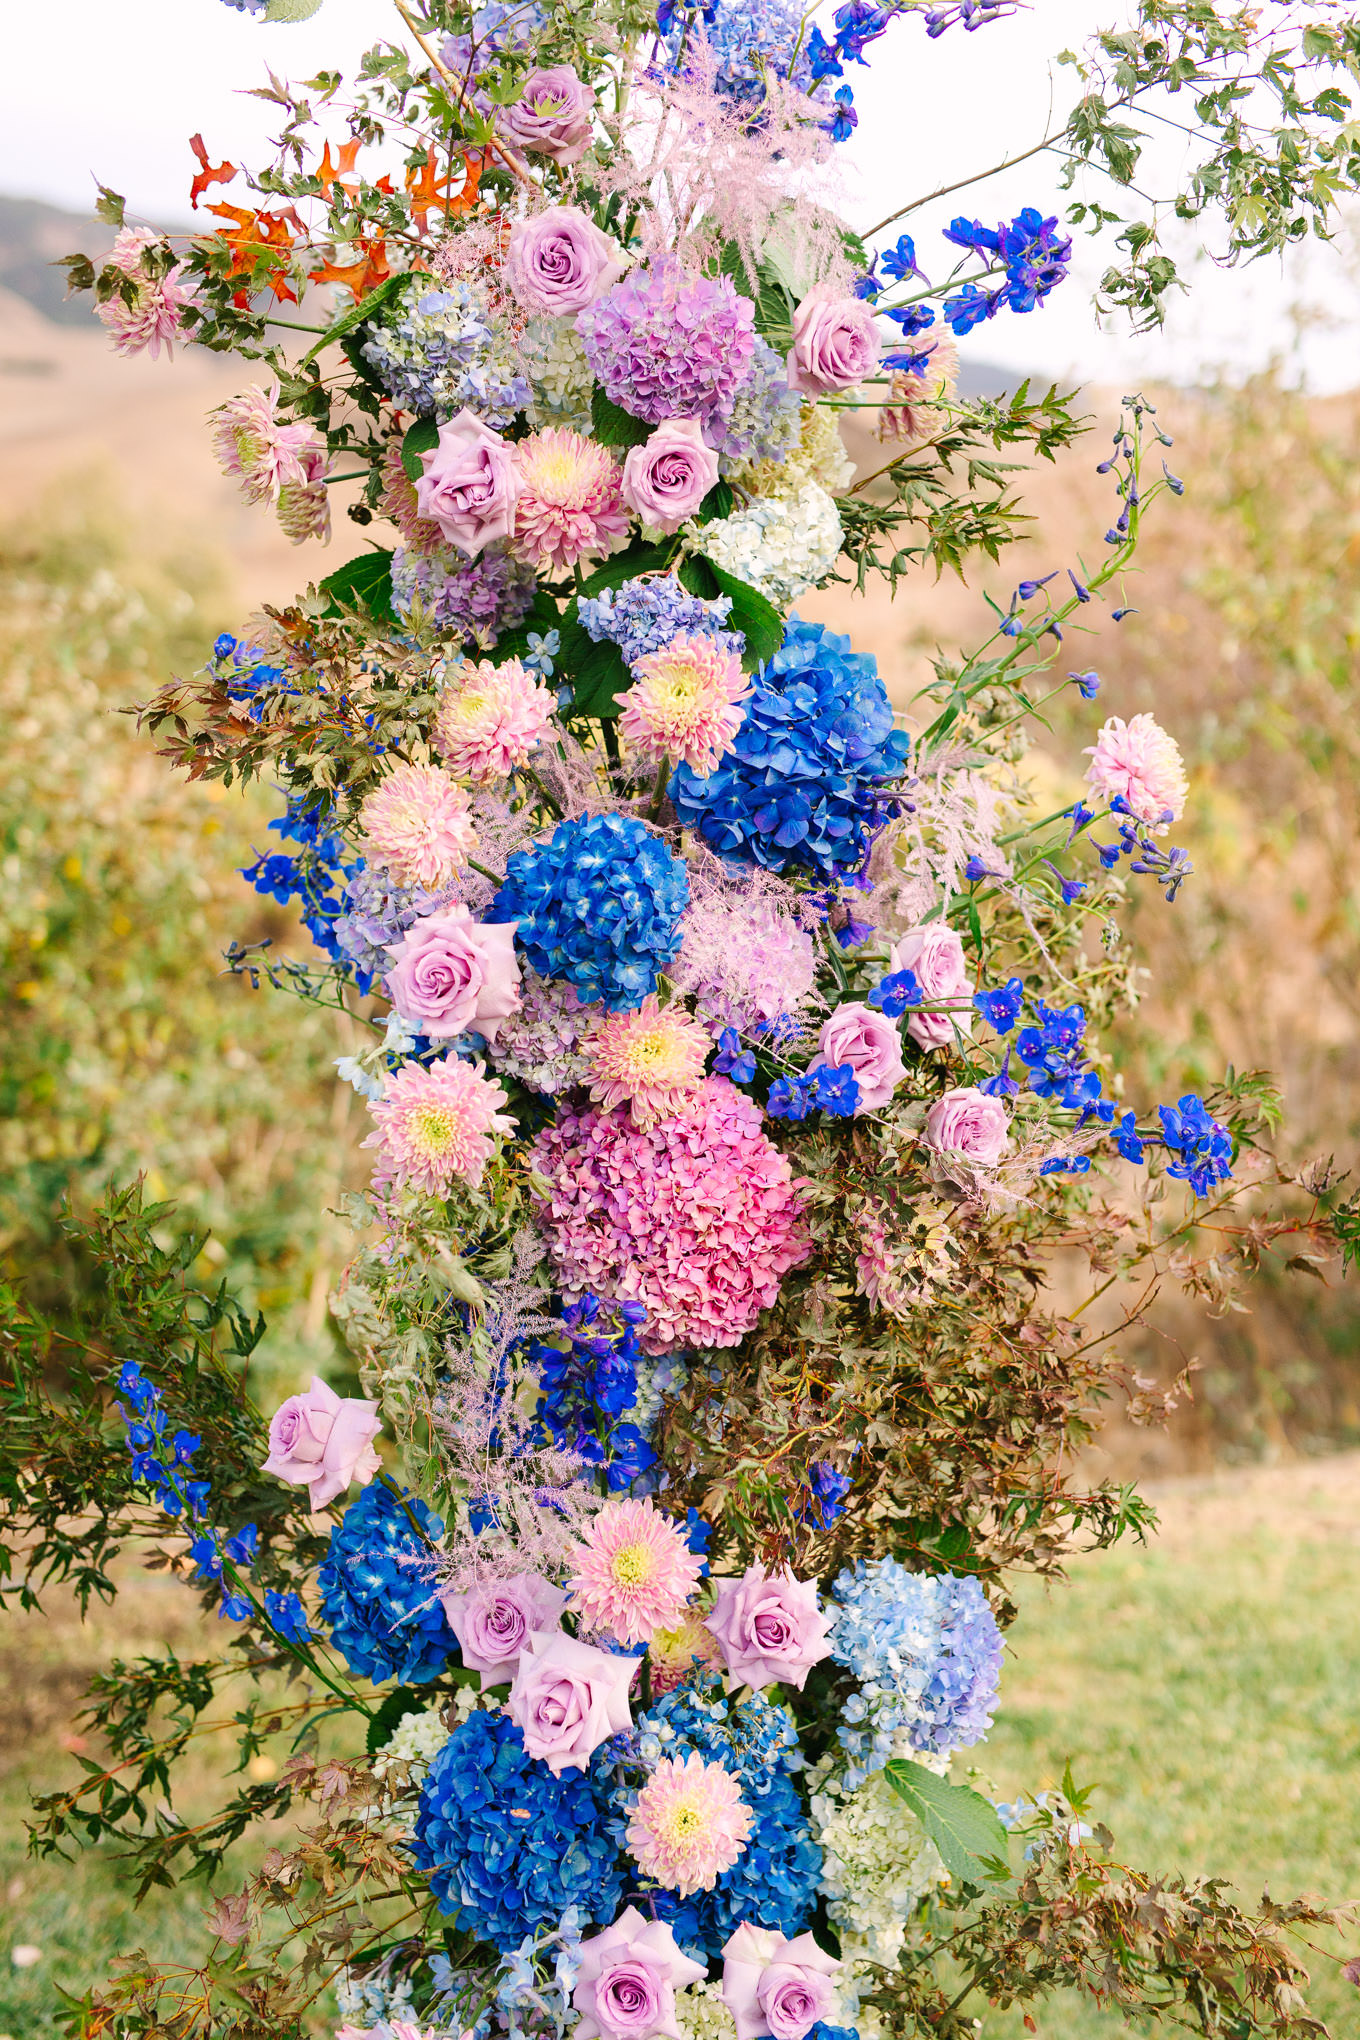 Blue and purple wedding ceremony flower arch | Colorful and quirky wedding at Higuera Ranch in San Luis Obispo | #sanluisobispowedding #californiawedding #higueraranch #madonnainn   
Source: Mary Costa Photography | Los Angeles
